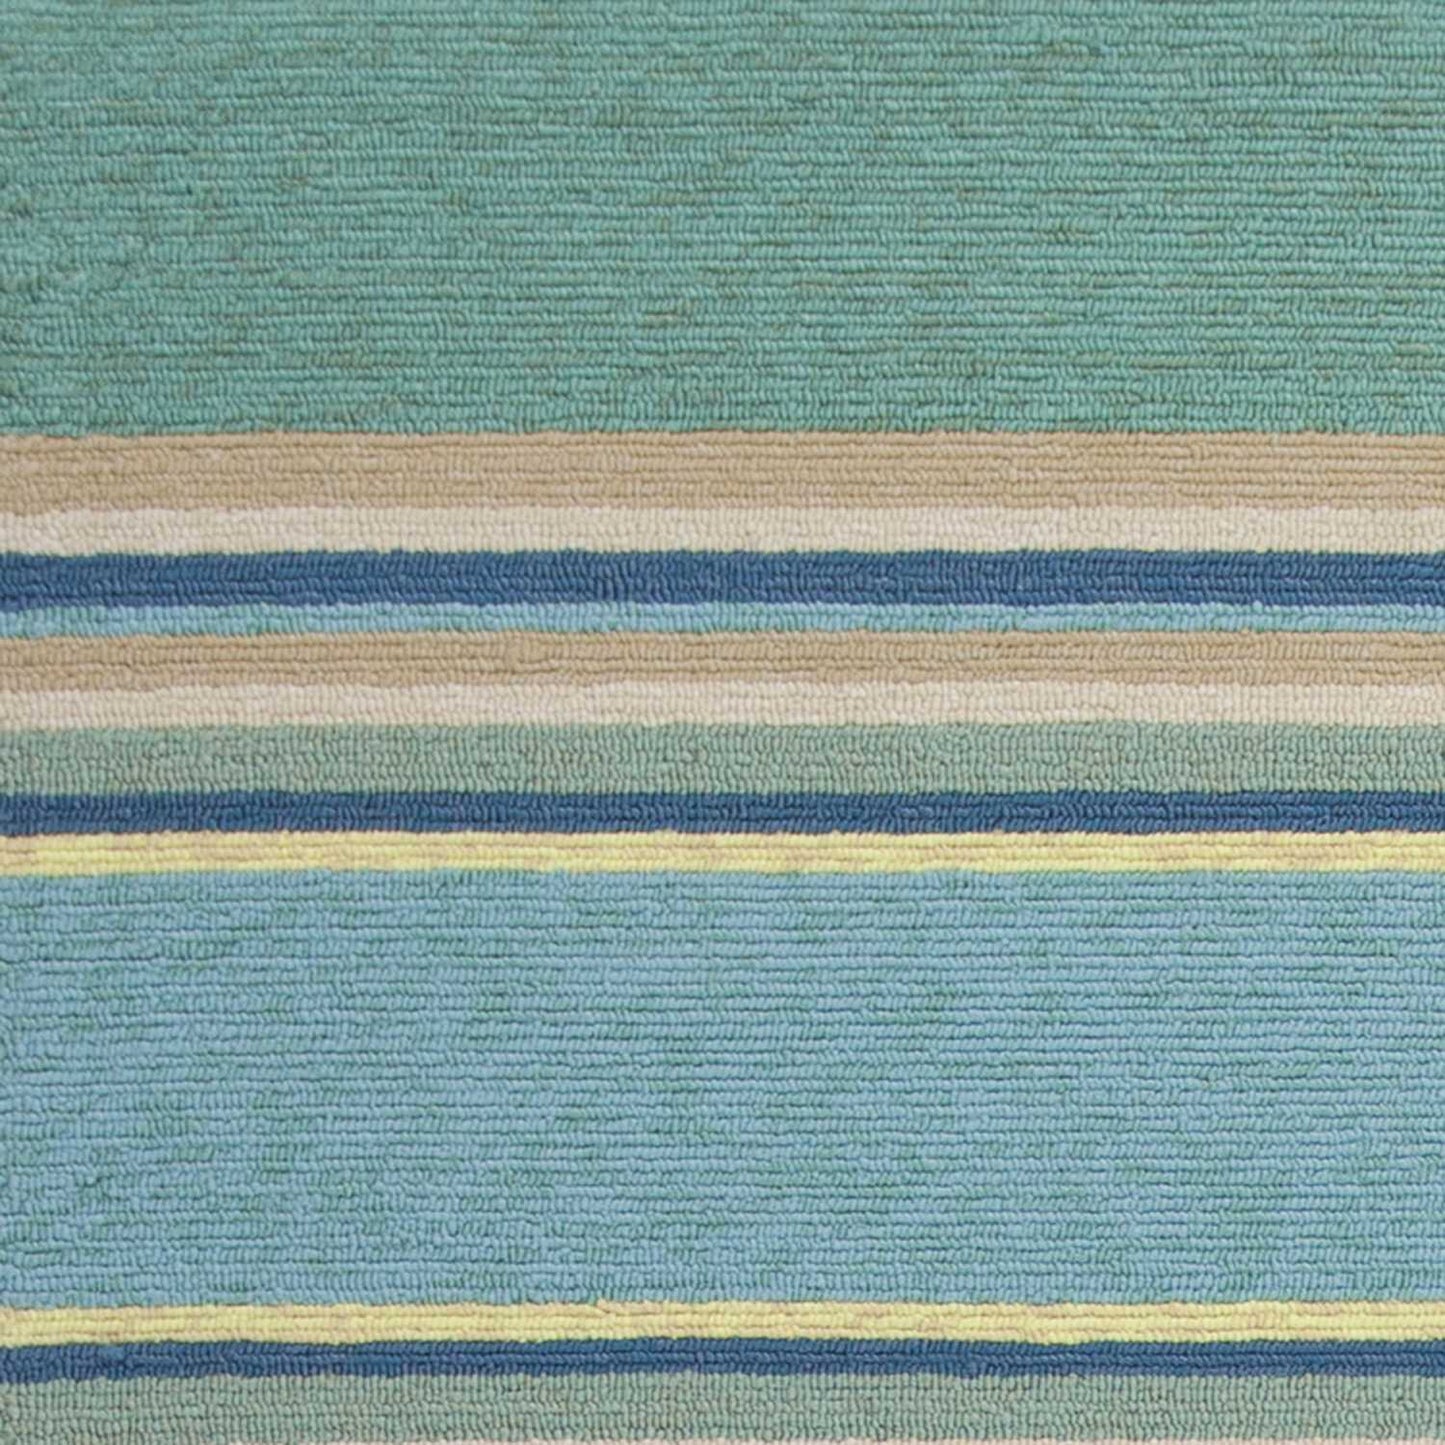 8'X10' Ocean Blue Hand Hooked Uv Treated Awning Stripes Indoor Outdoor Area Rug